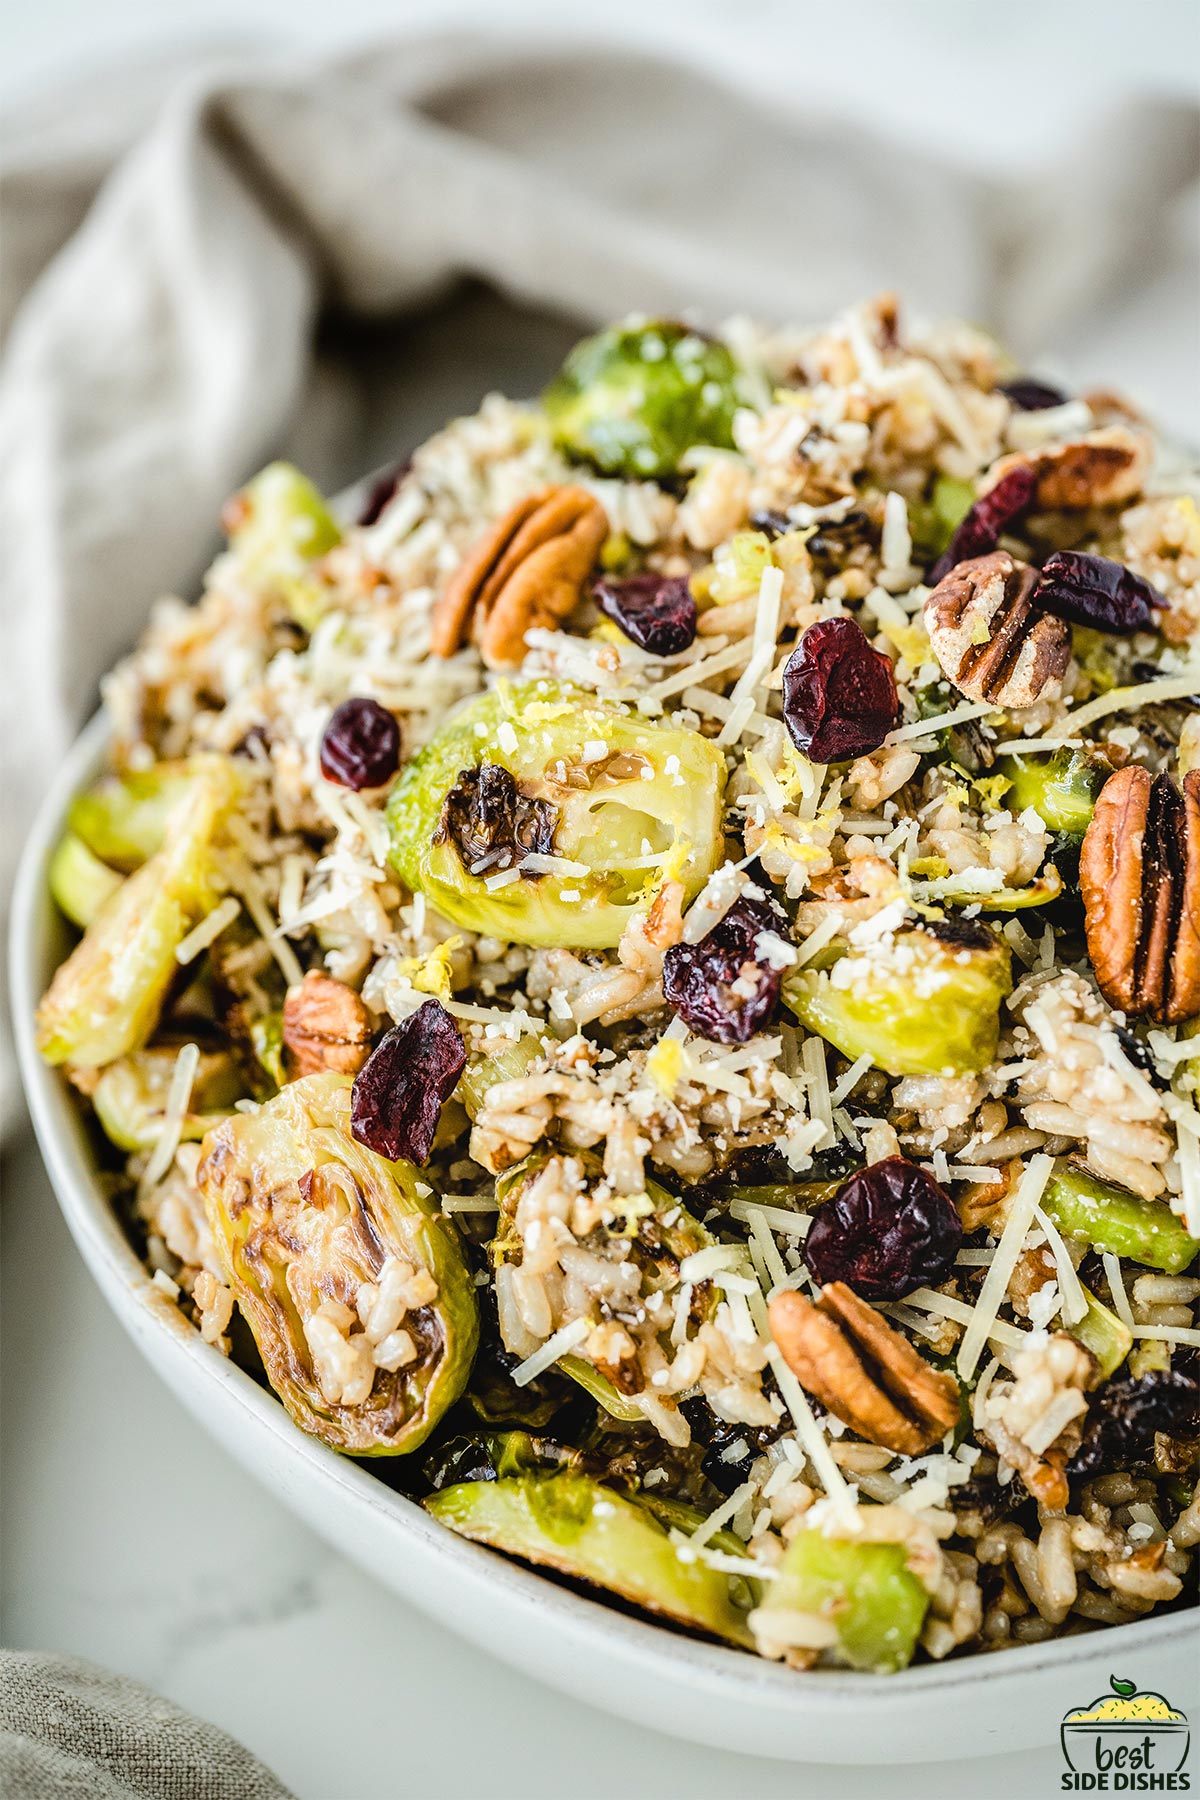 Brussels sprouts in a white bowl